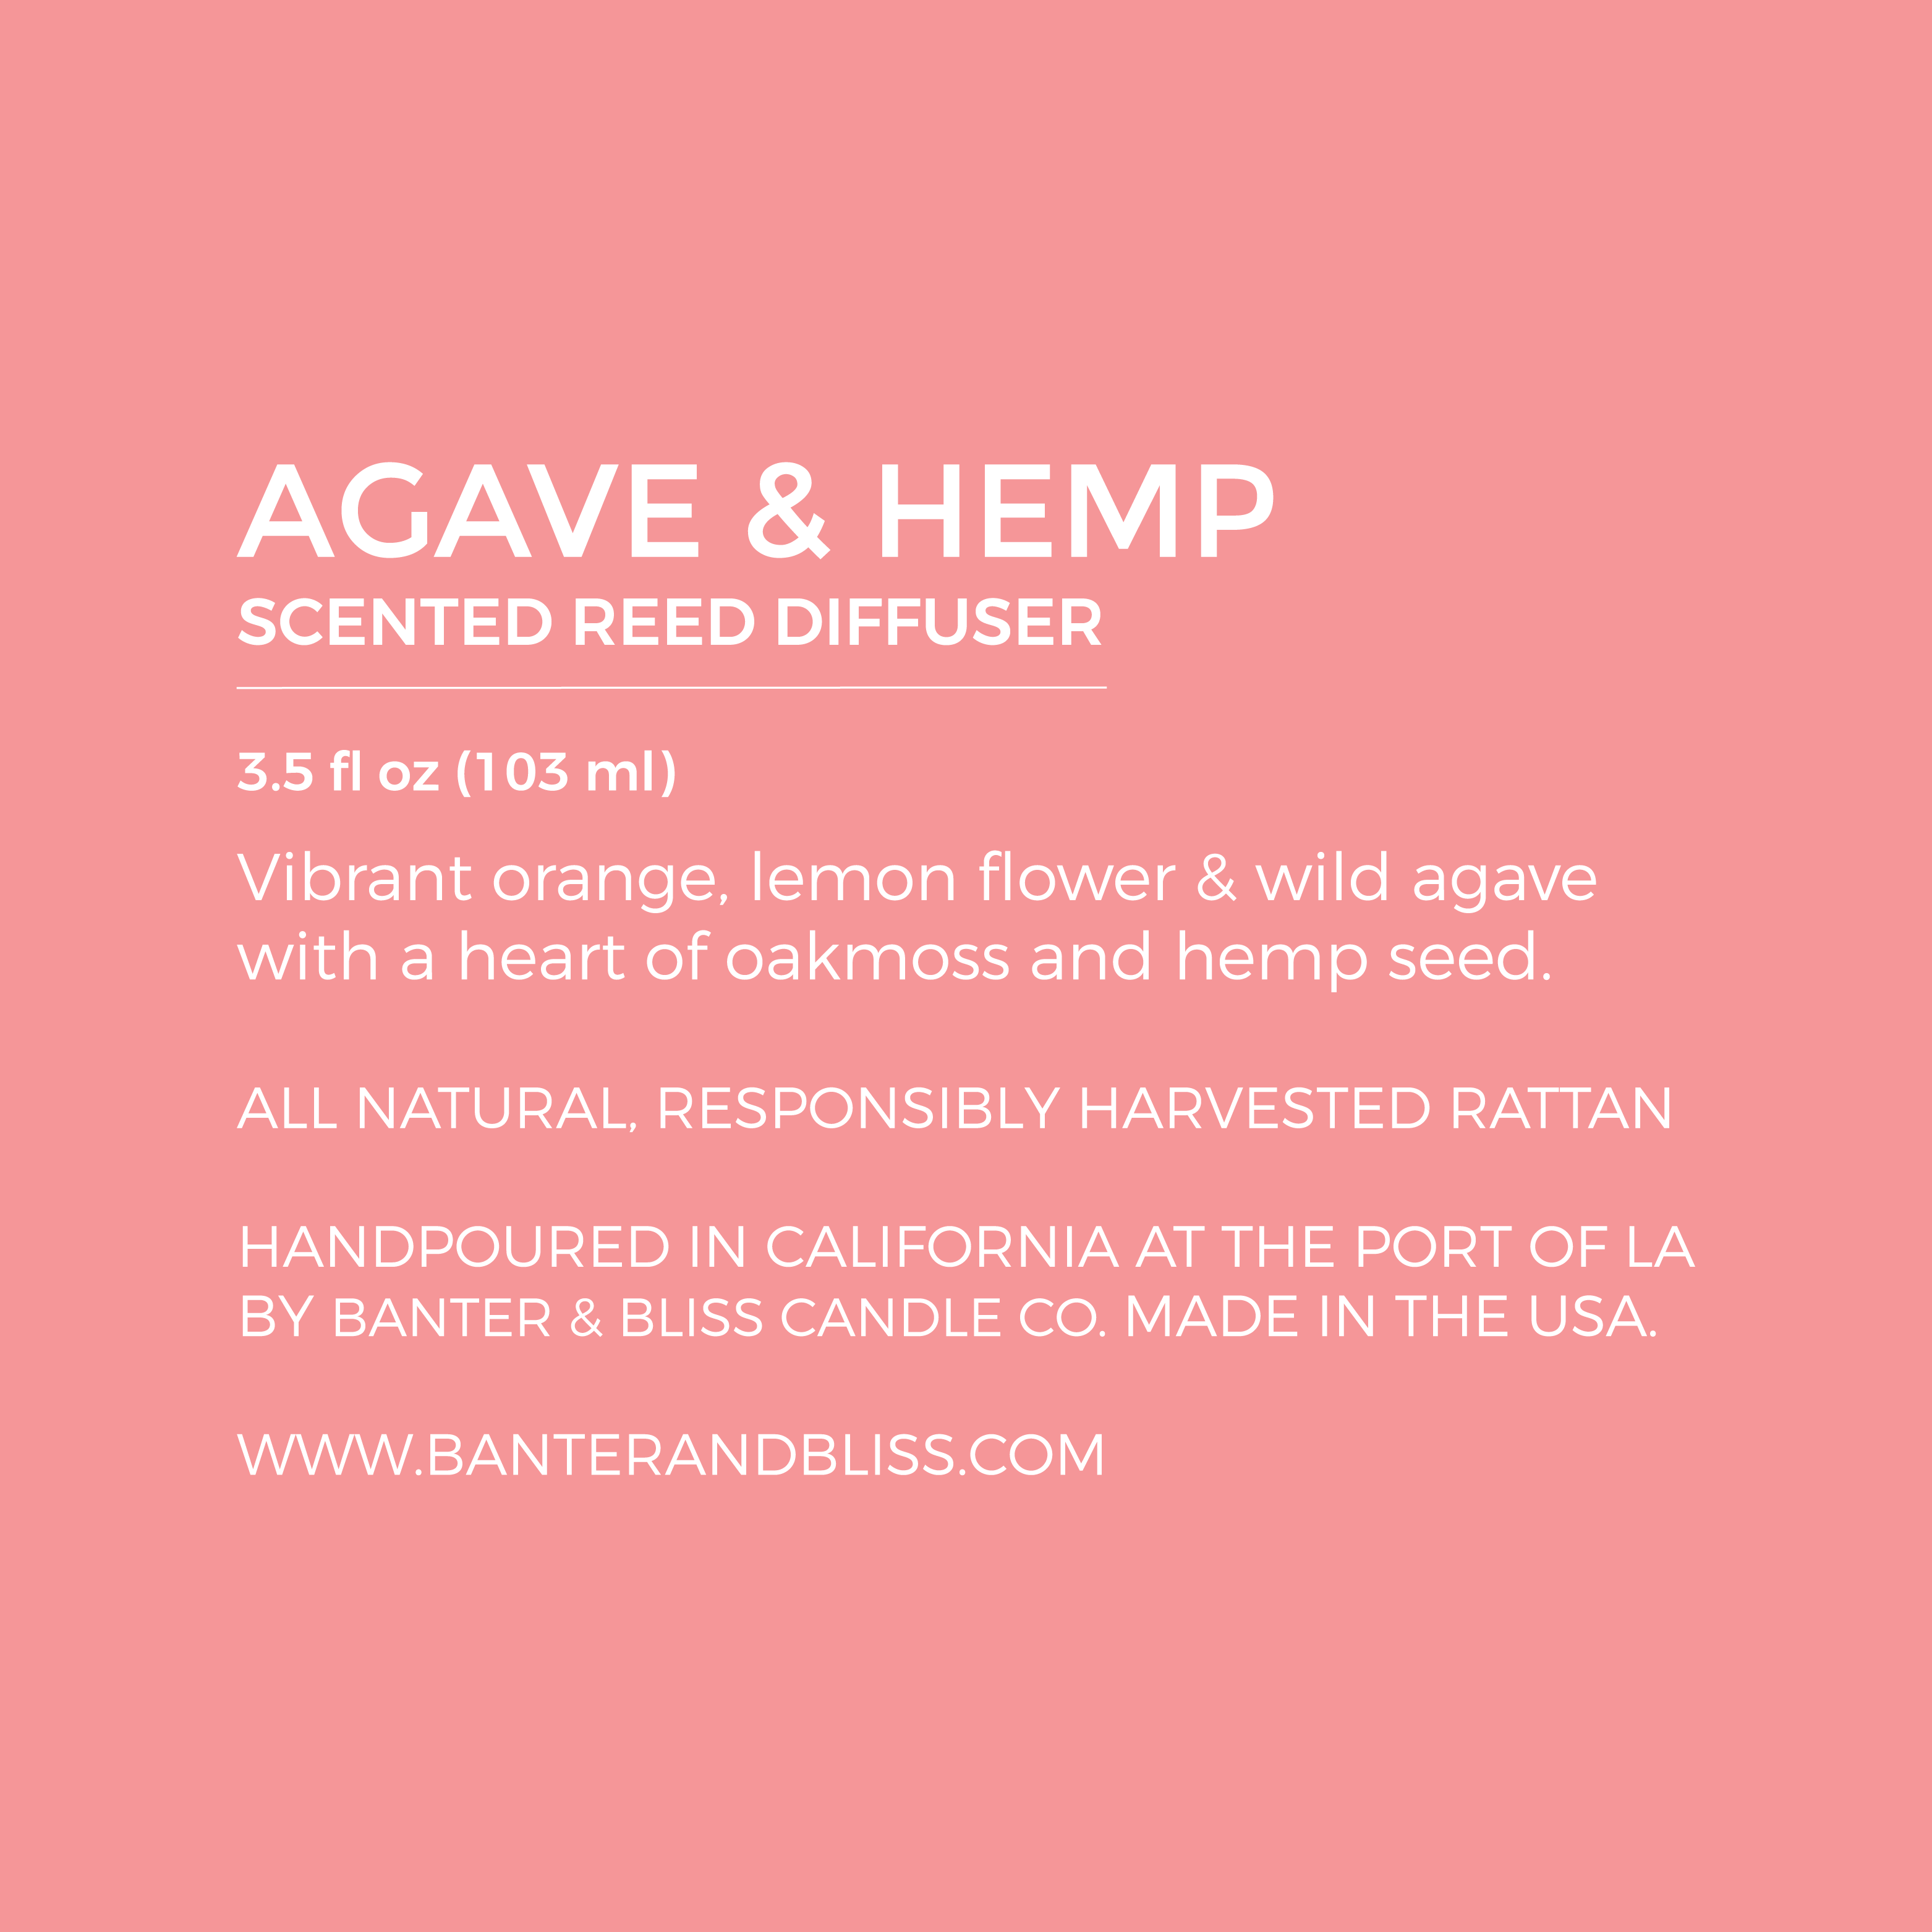 Agave & Hemp. Scented Reed Diffuser.